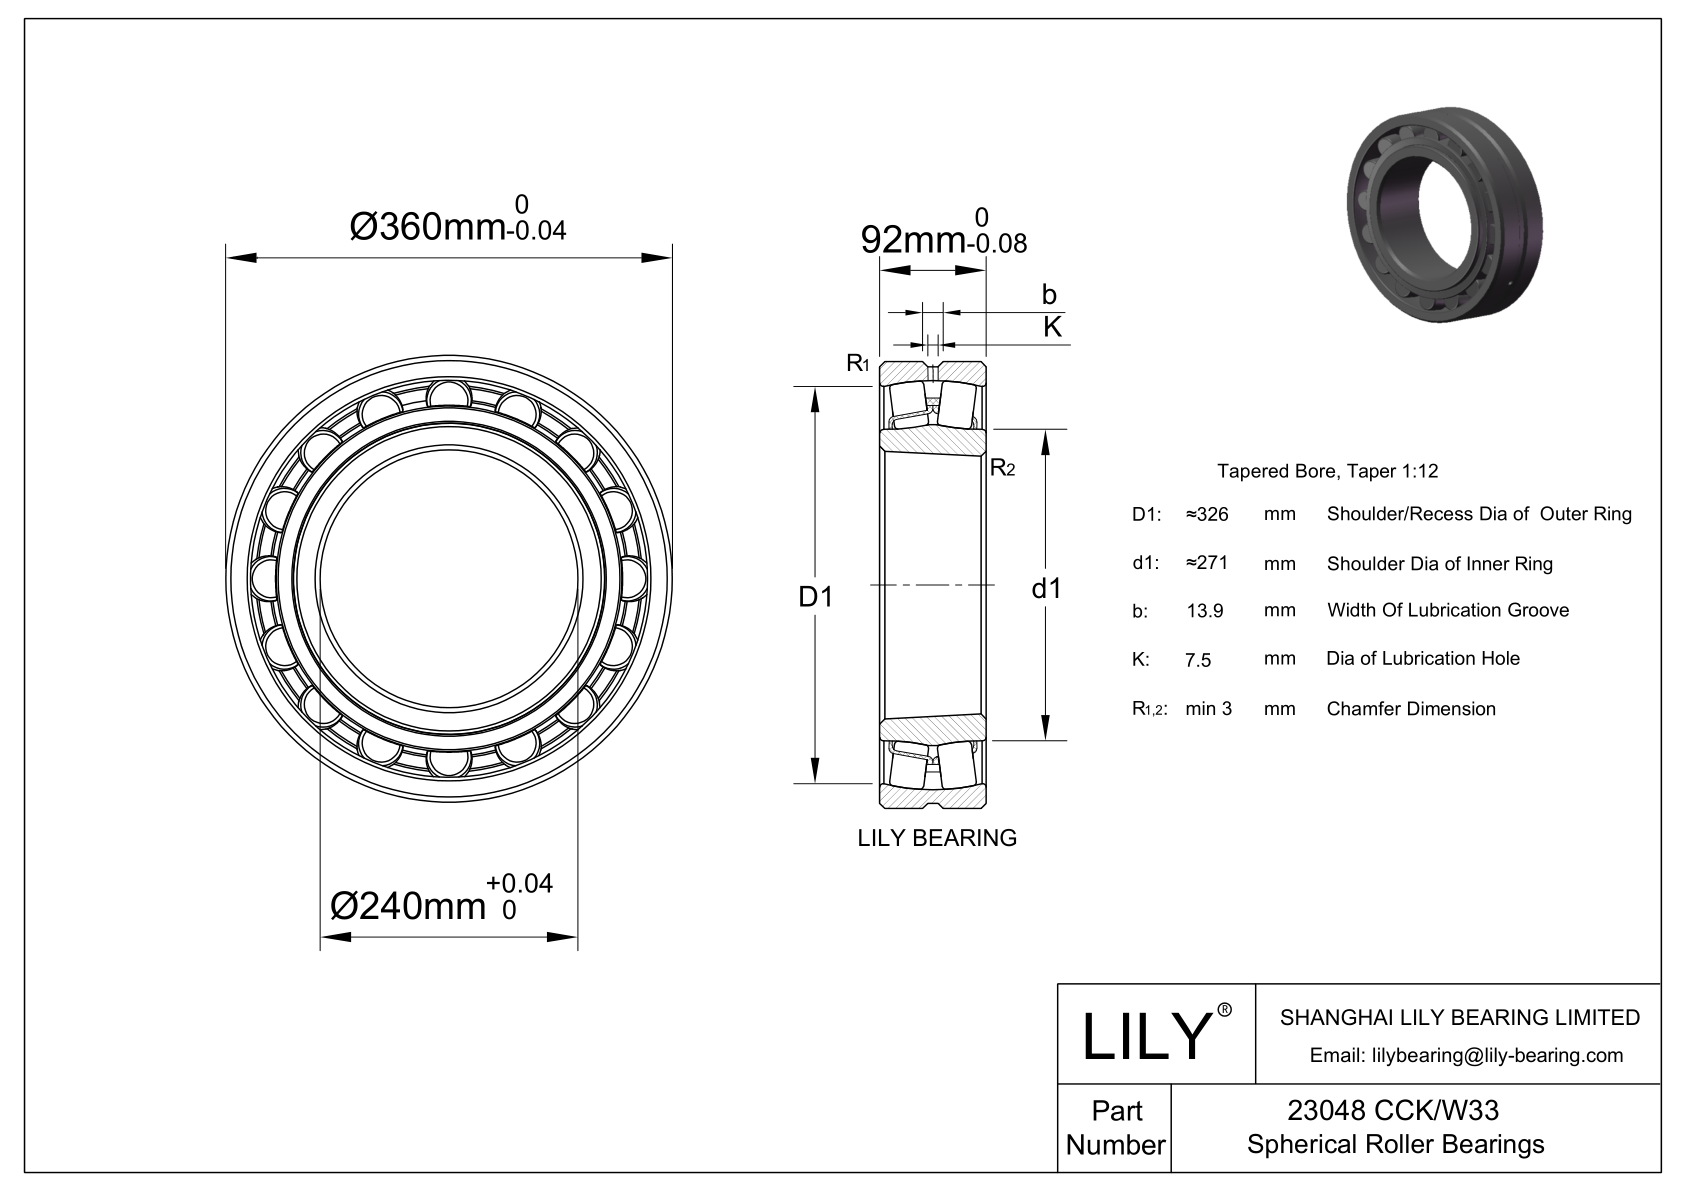 23048 CCK/W33 Double Row Spherical Roller Bearing cad drawing